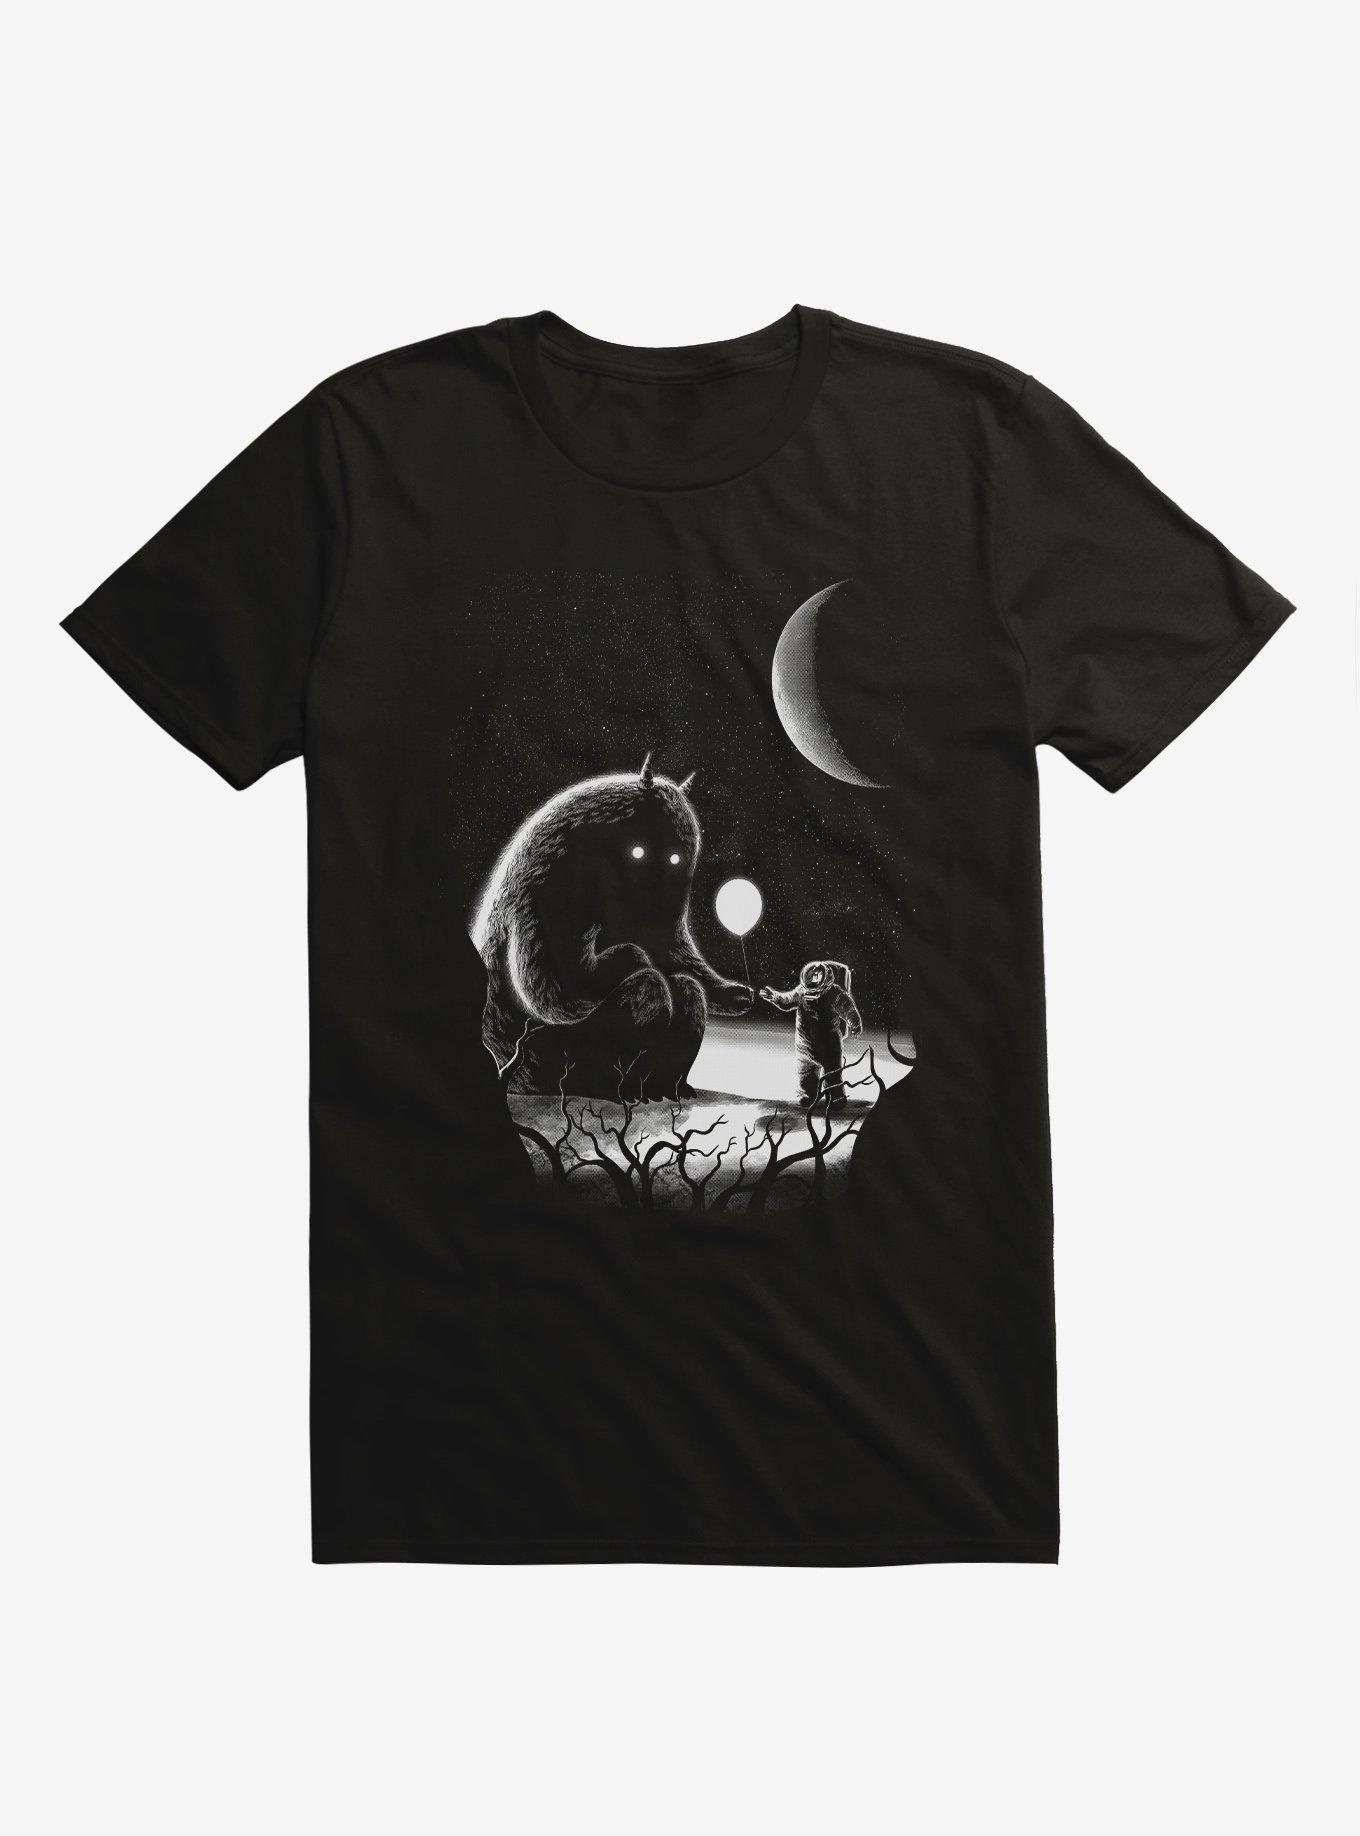 The Guest Astronaut And Extraterrestrial Black T-Shirt, BLACK, hi-res